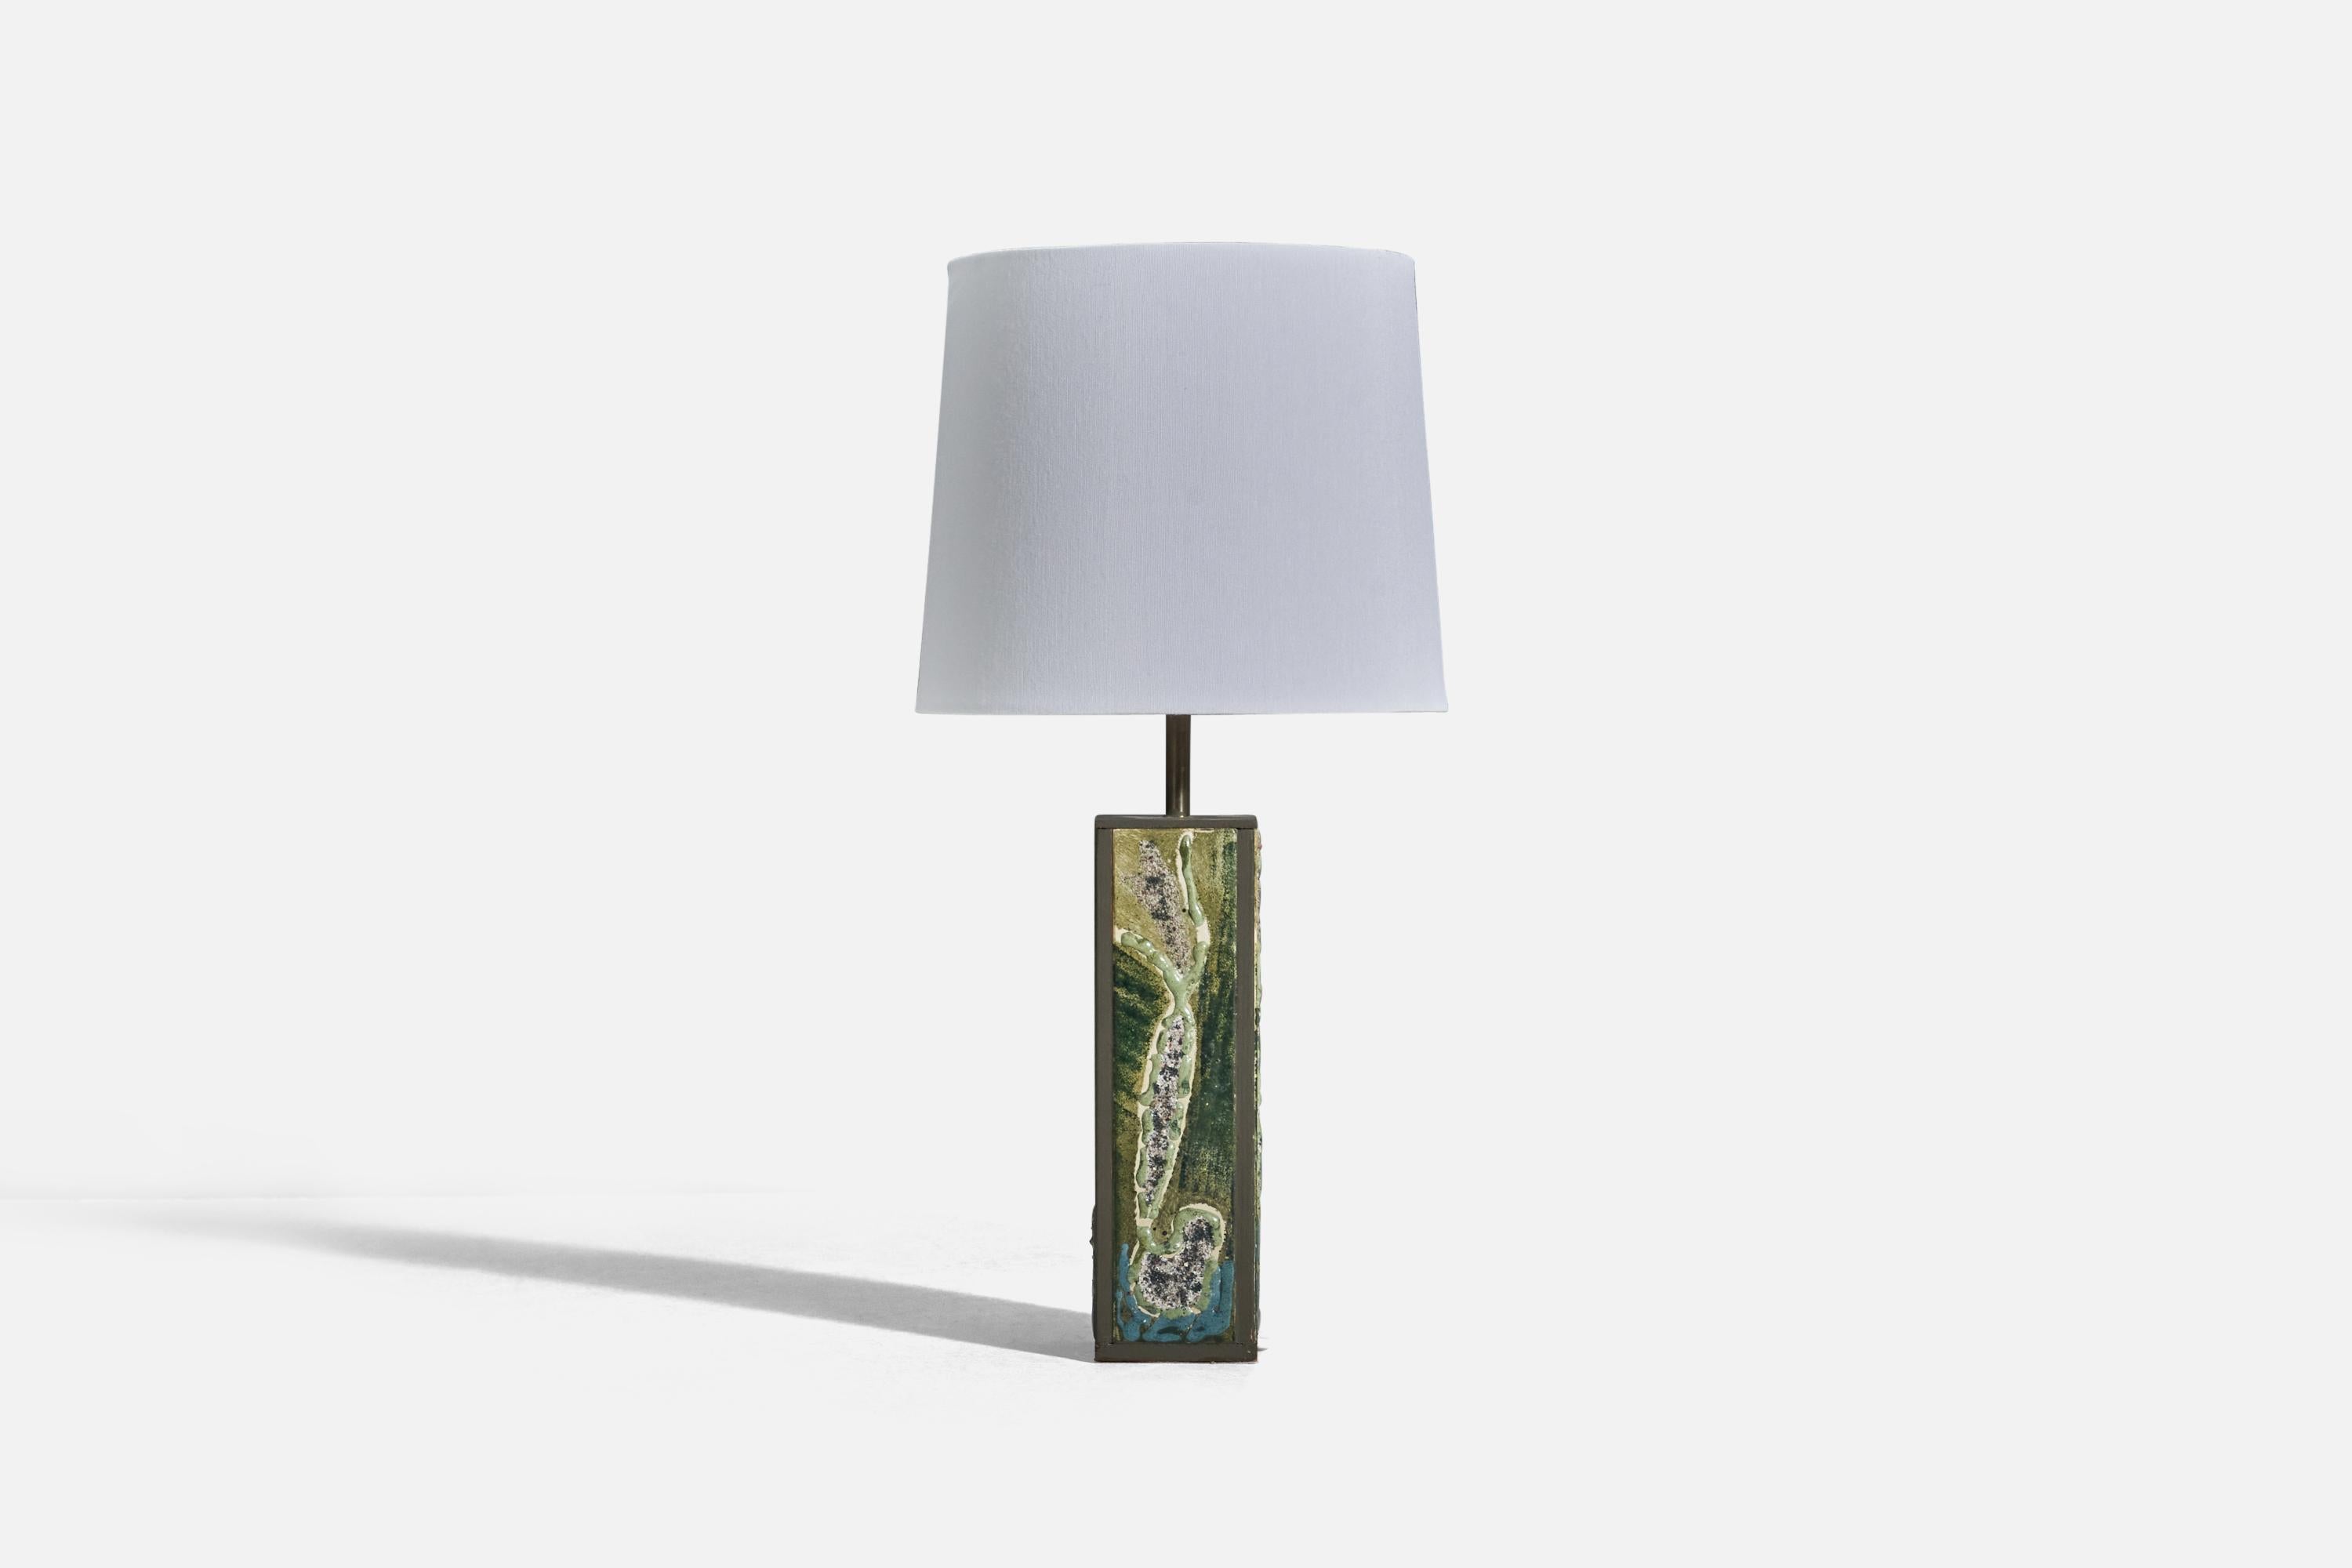 A green glazed stoneware and metal table lamp designed and produced in Denmark, 1950s. 

Sold without lampshade
Dimensions of lamp (inches) : 12.5 x 2.55 x 2.55 (Height x Width x Depth)
Dimensions of lampshade (inches) : 7 x 8 x 7 (Top Diameter